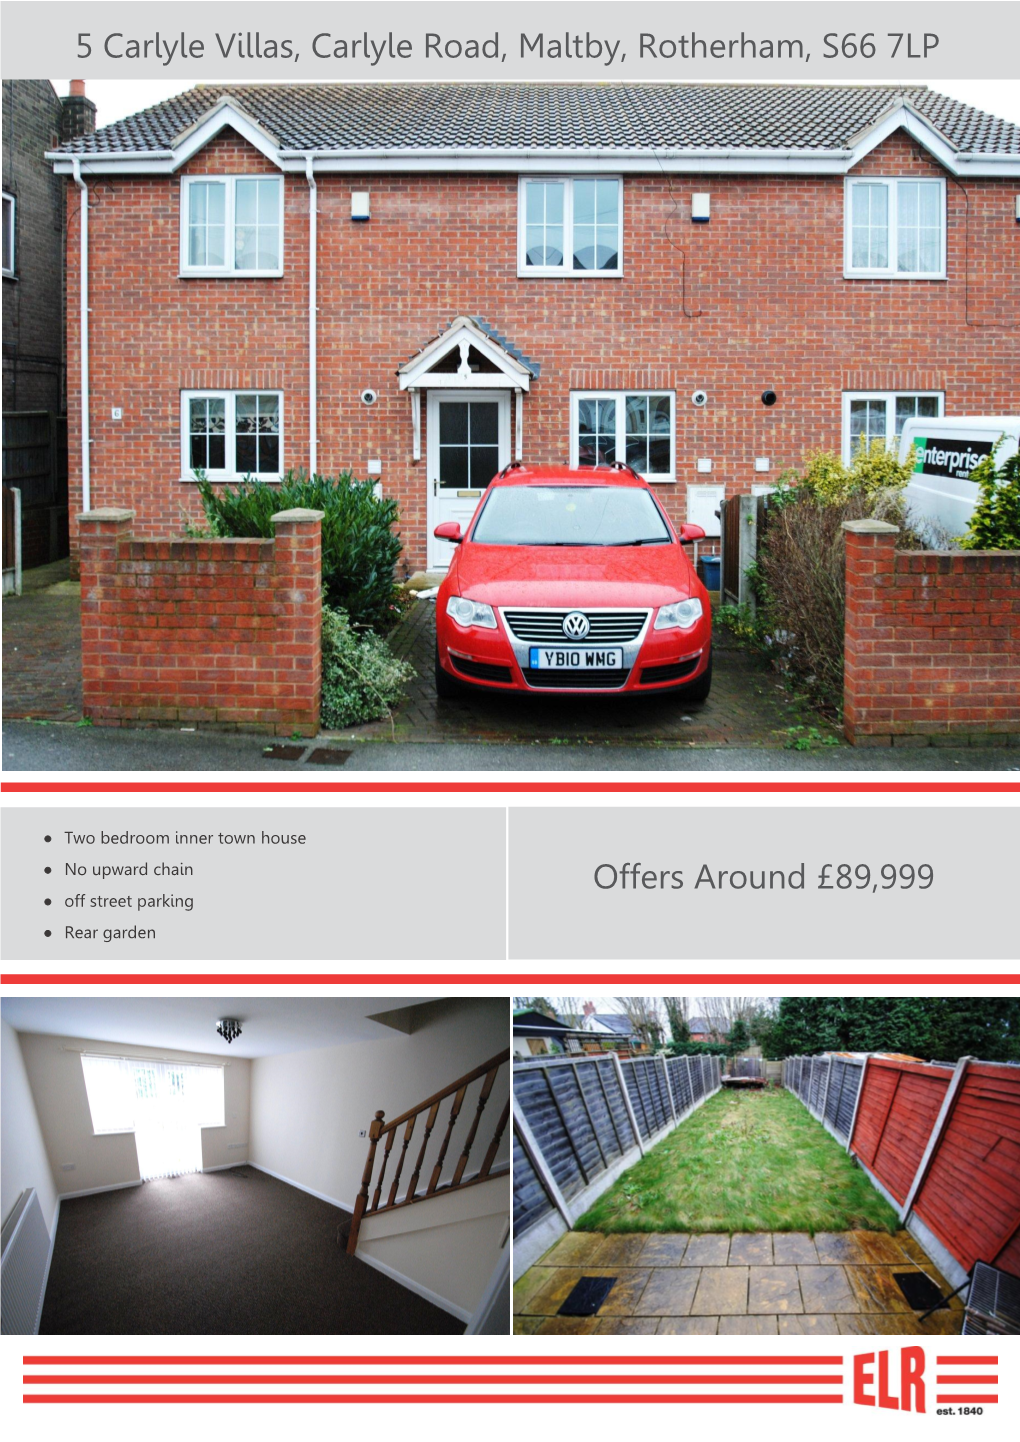 Offers Around £89,999 5 Carlyle Villas, Carlyle Road, Maltby, Rotherham, S66